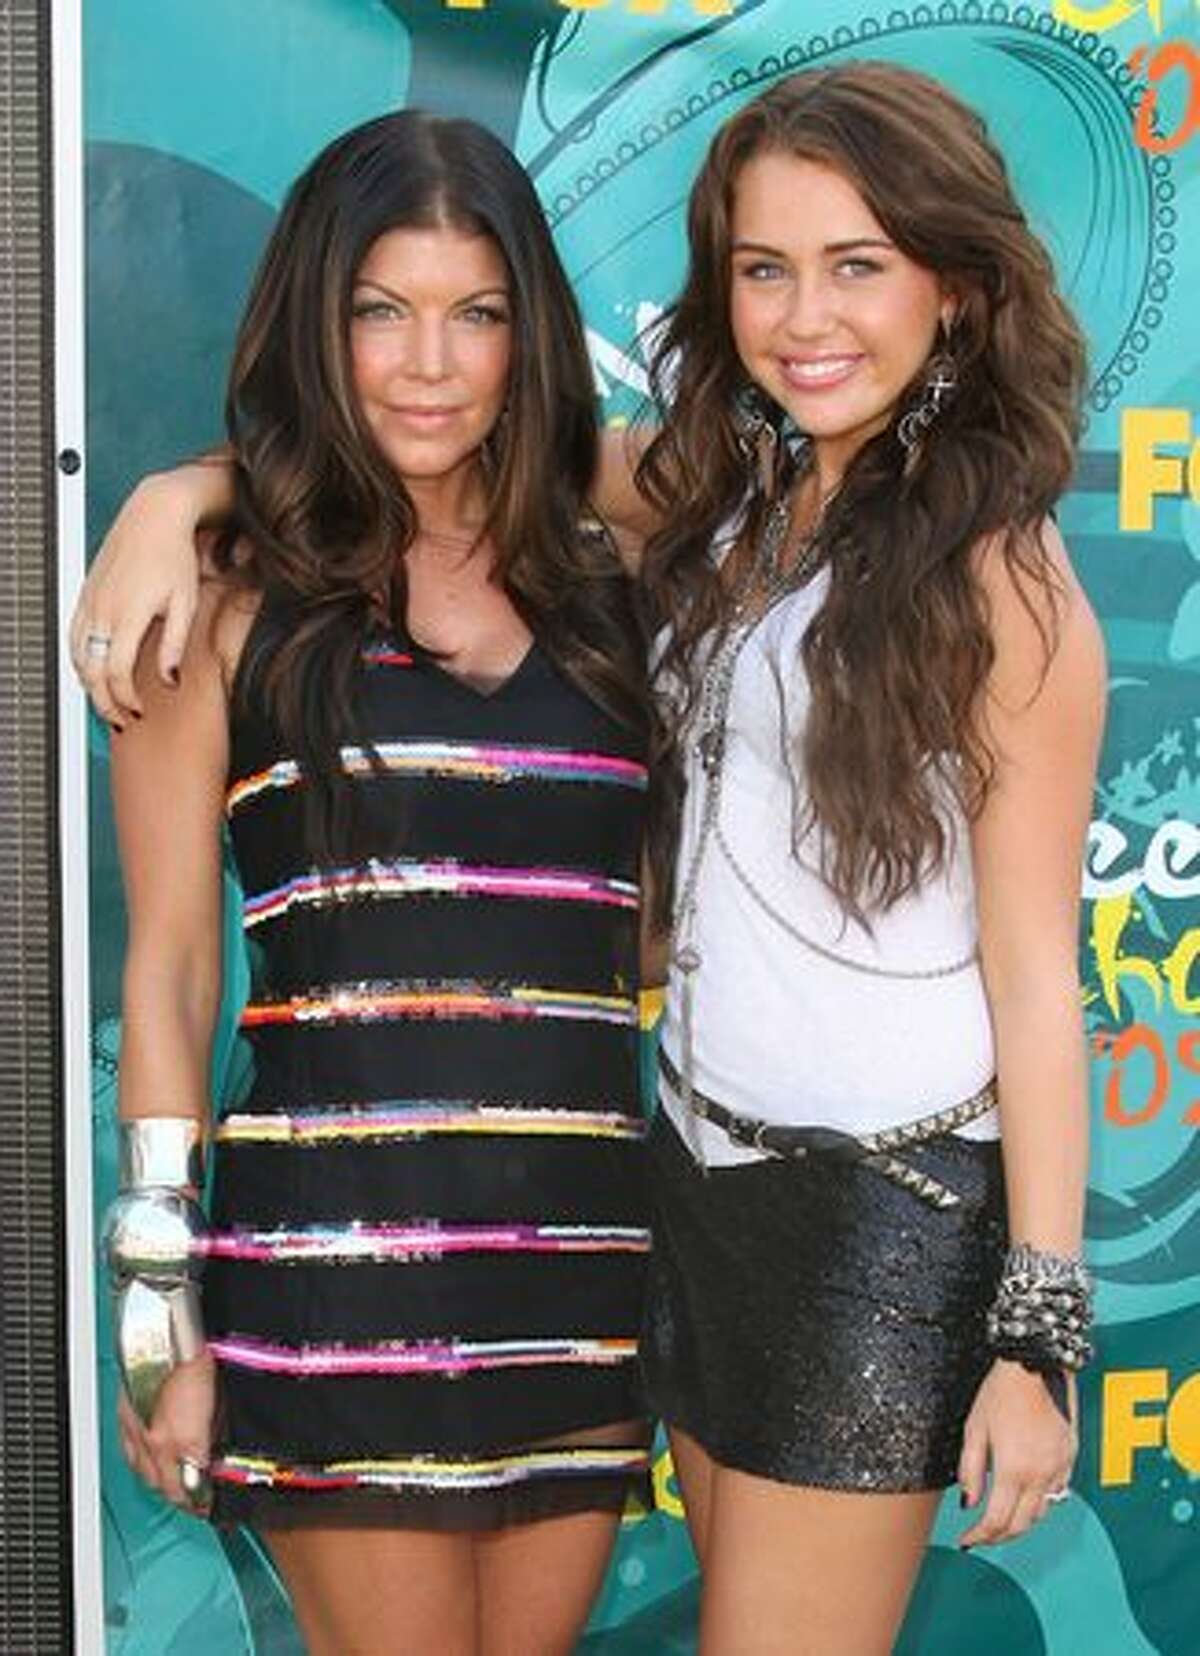 Singer/actress Fergie and Cyrus arrive at the 2009 Teen Choice Awards held at Gibson Amphitheatre in Universal City, Calif., on August 9, 2009.